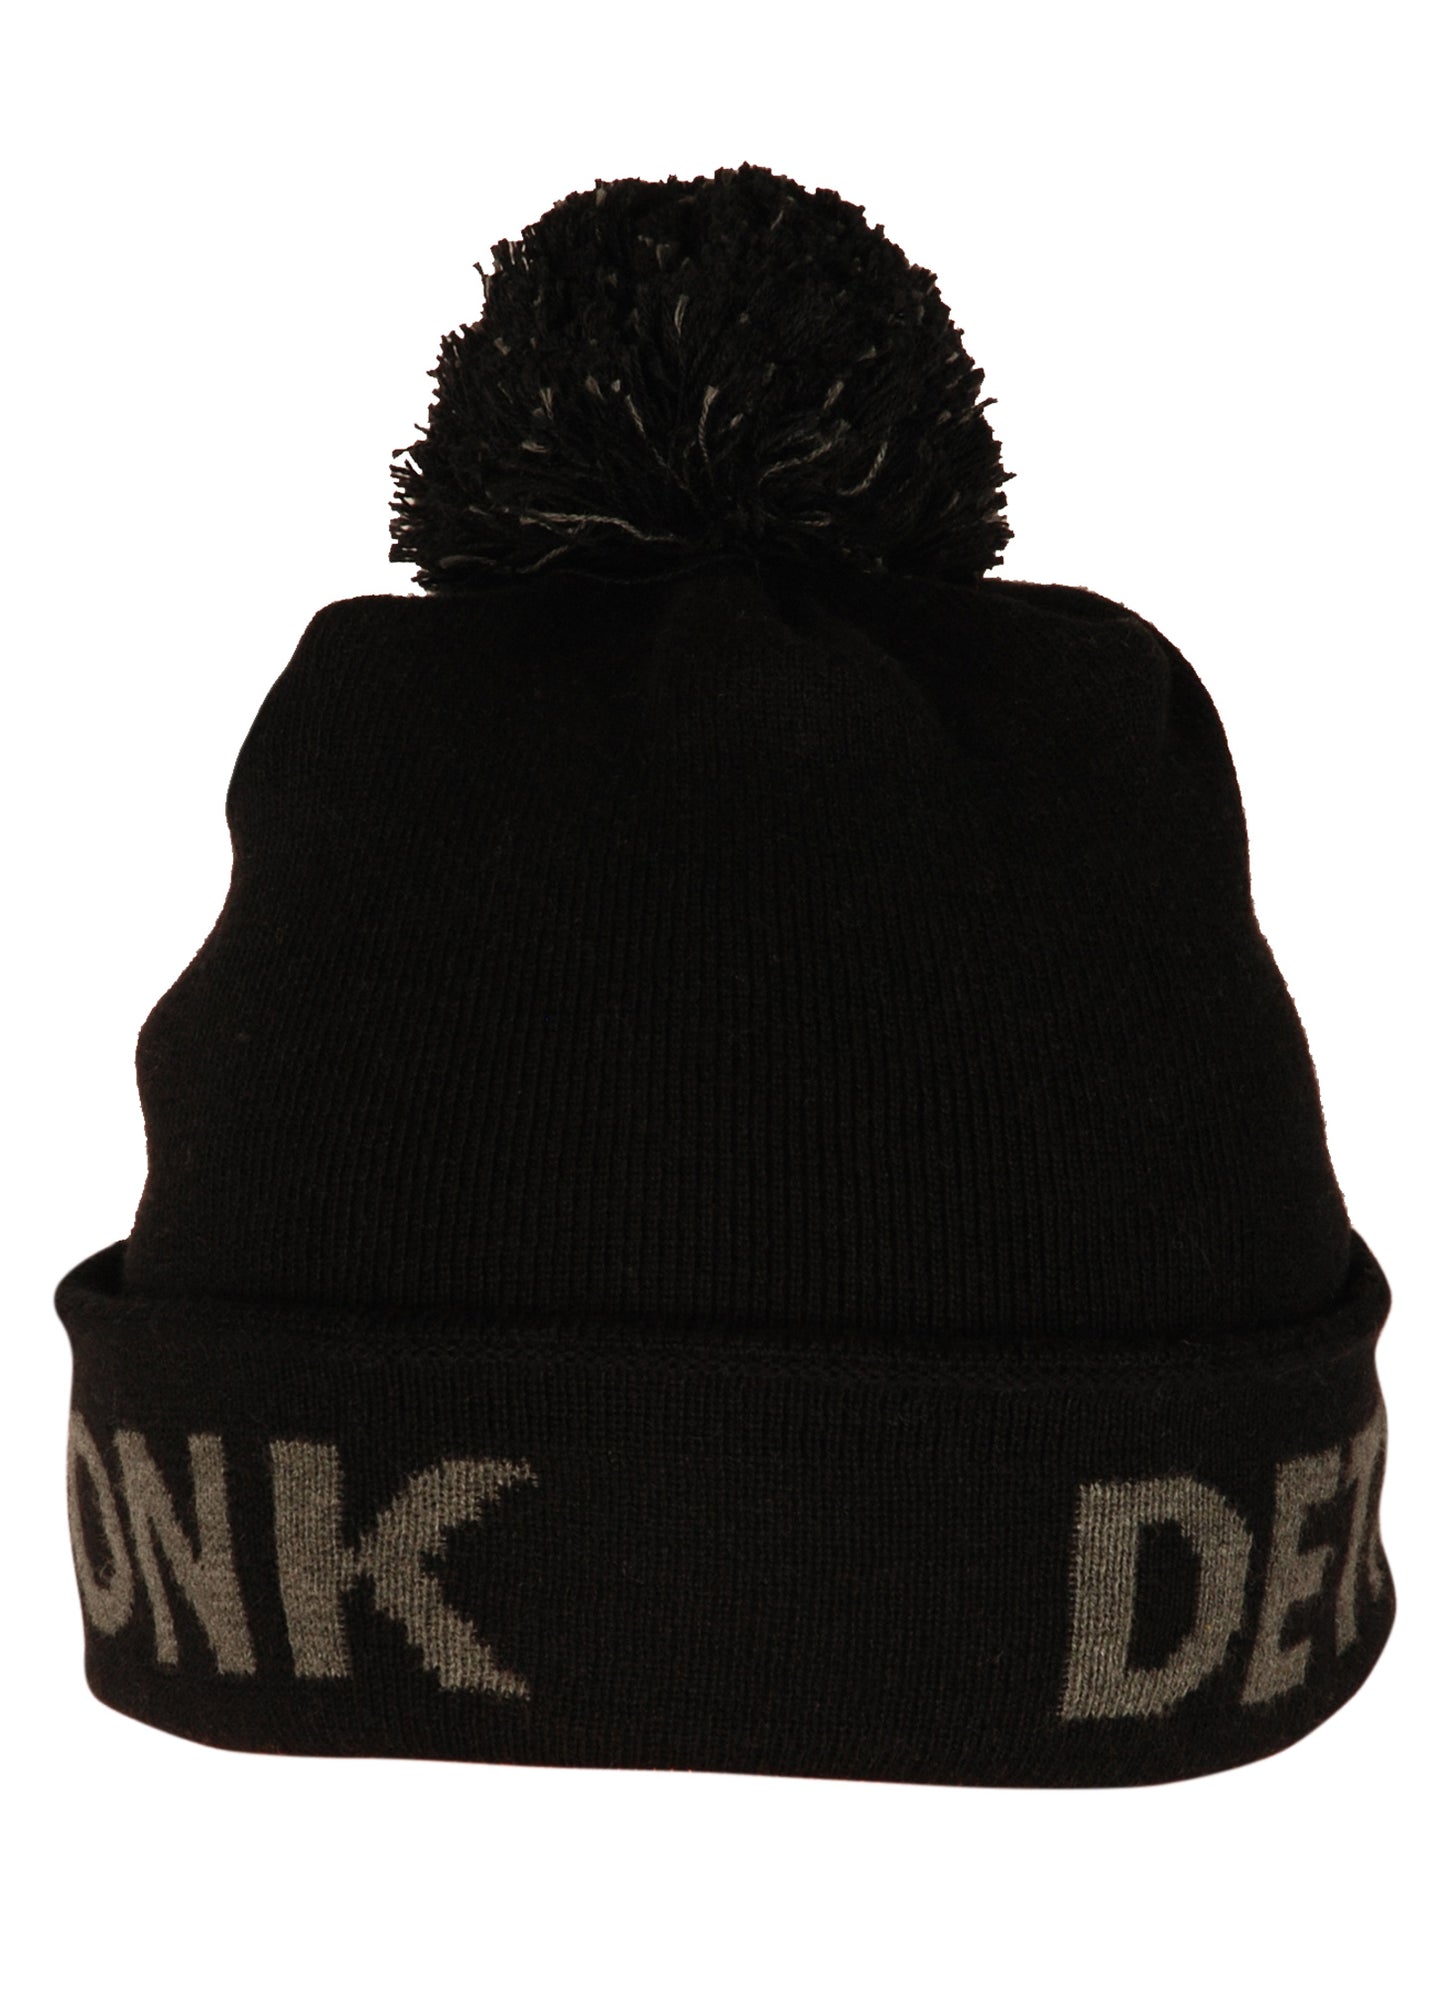 KRONK Detroit Bobble Hat Black with Charcoal knitted logo